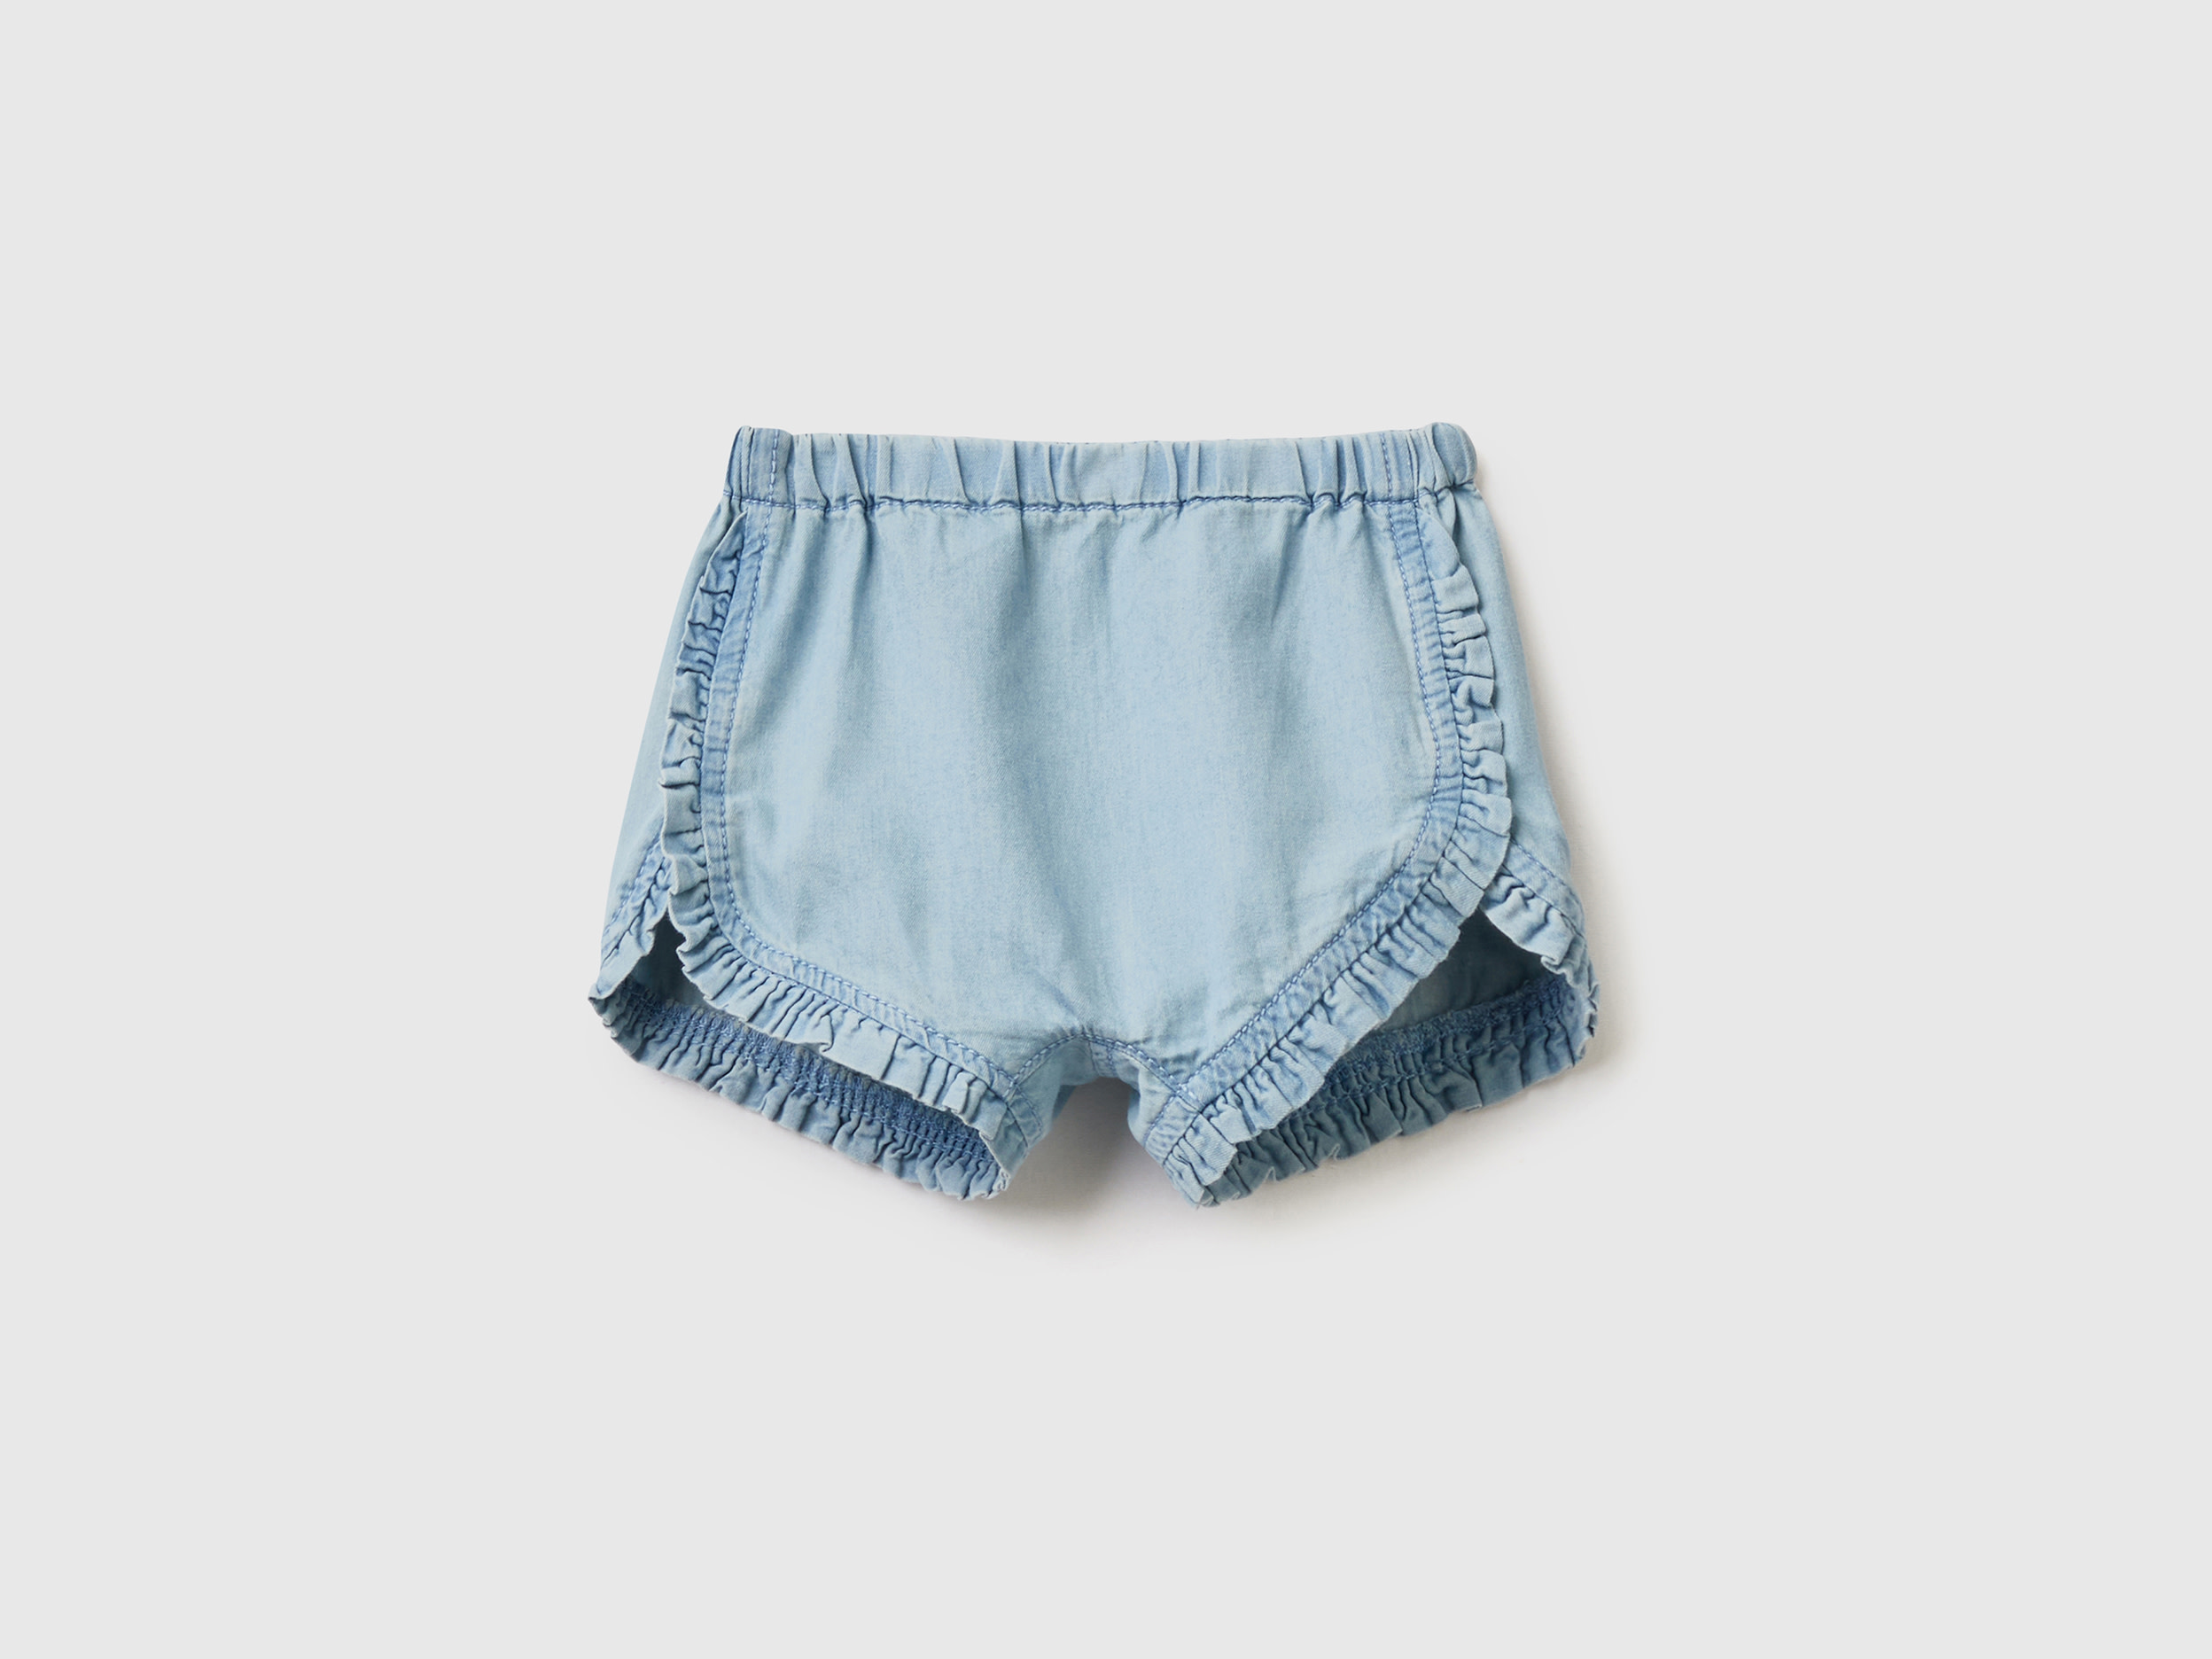 Benetton, Shorts With Rouches, size 1-3, Sky Blue, Kids